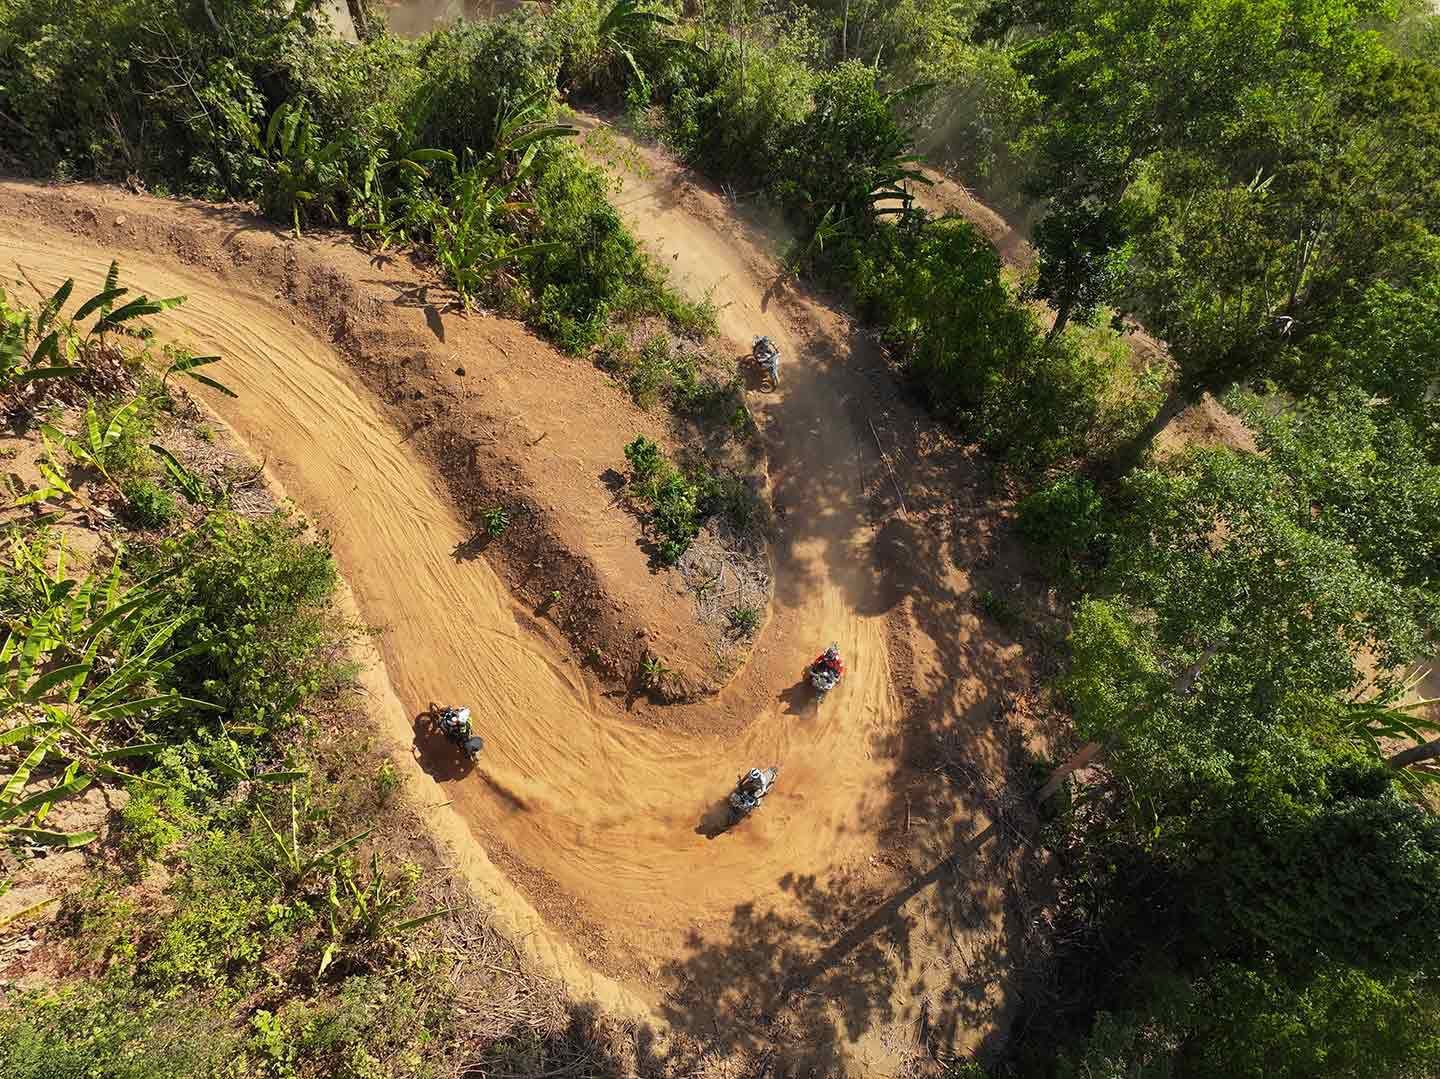 Here we have an off-road park. Dried out with steep climbs, deep sand, and sharp turns. The Ibex 450 took it all in stride.